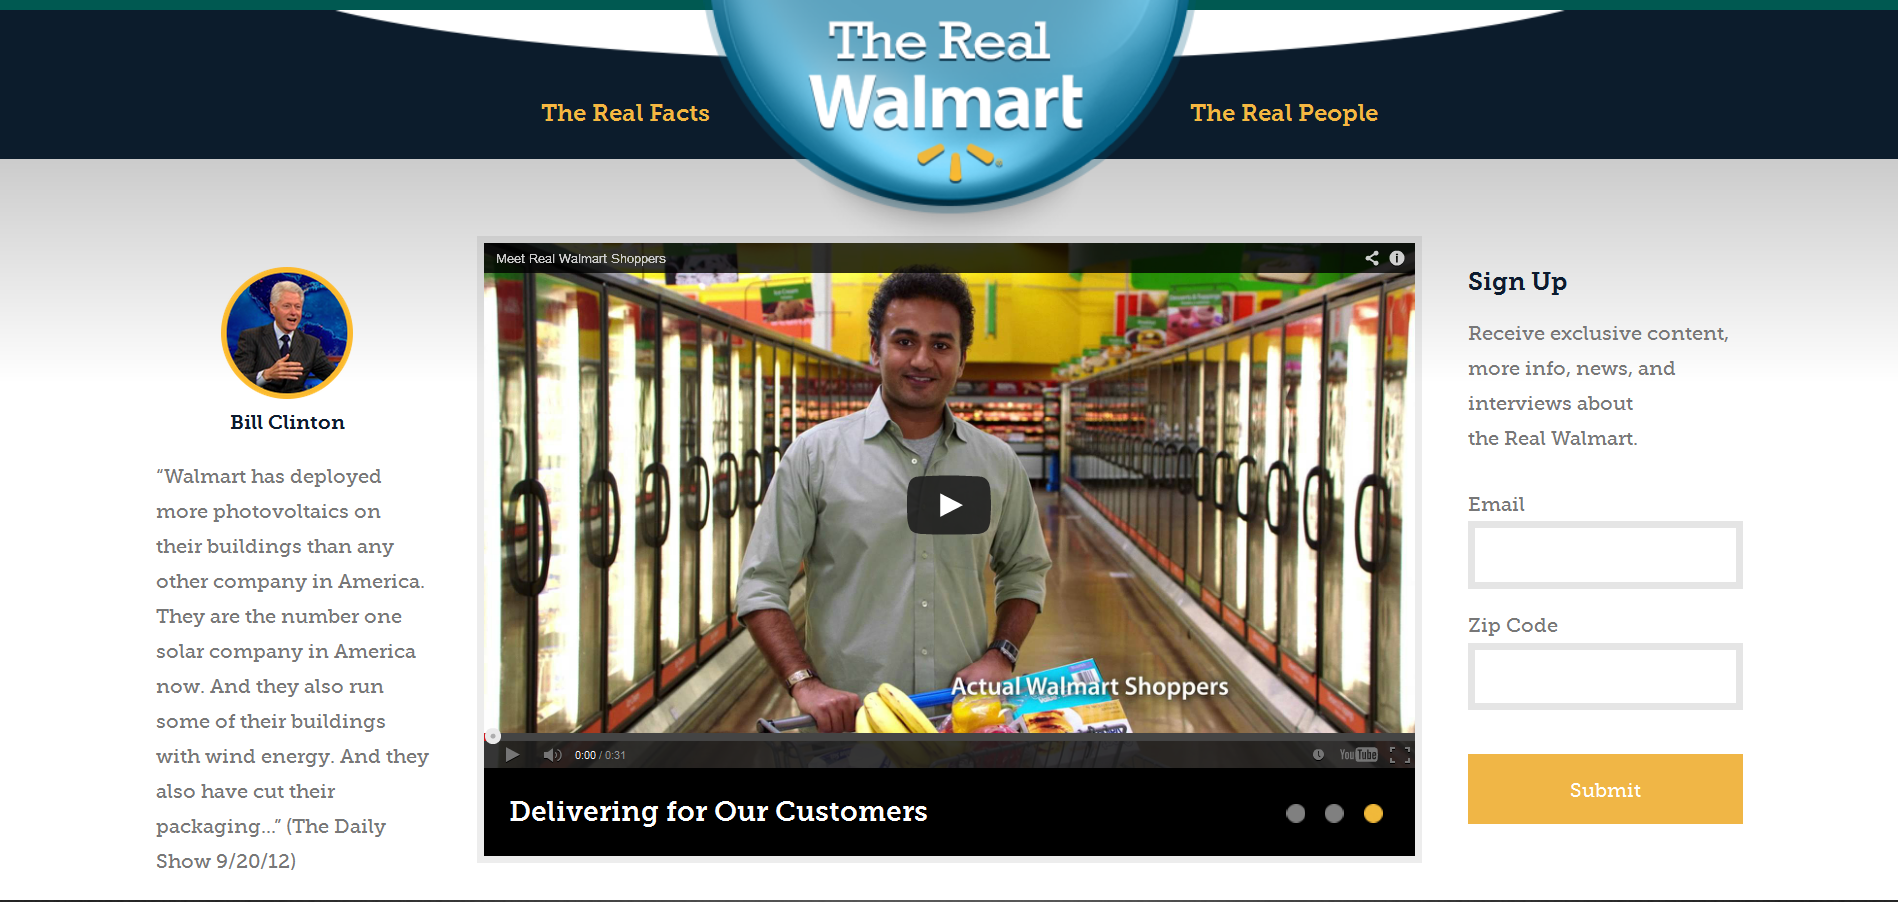 Learn About The Real Walmart